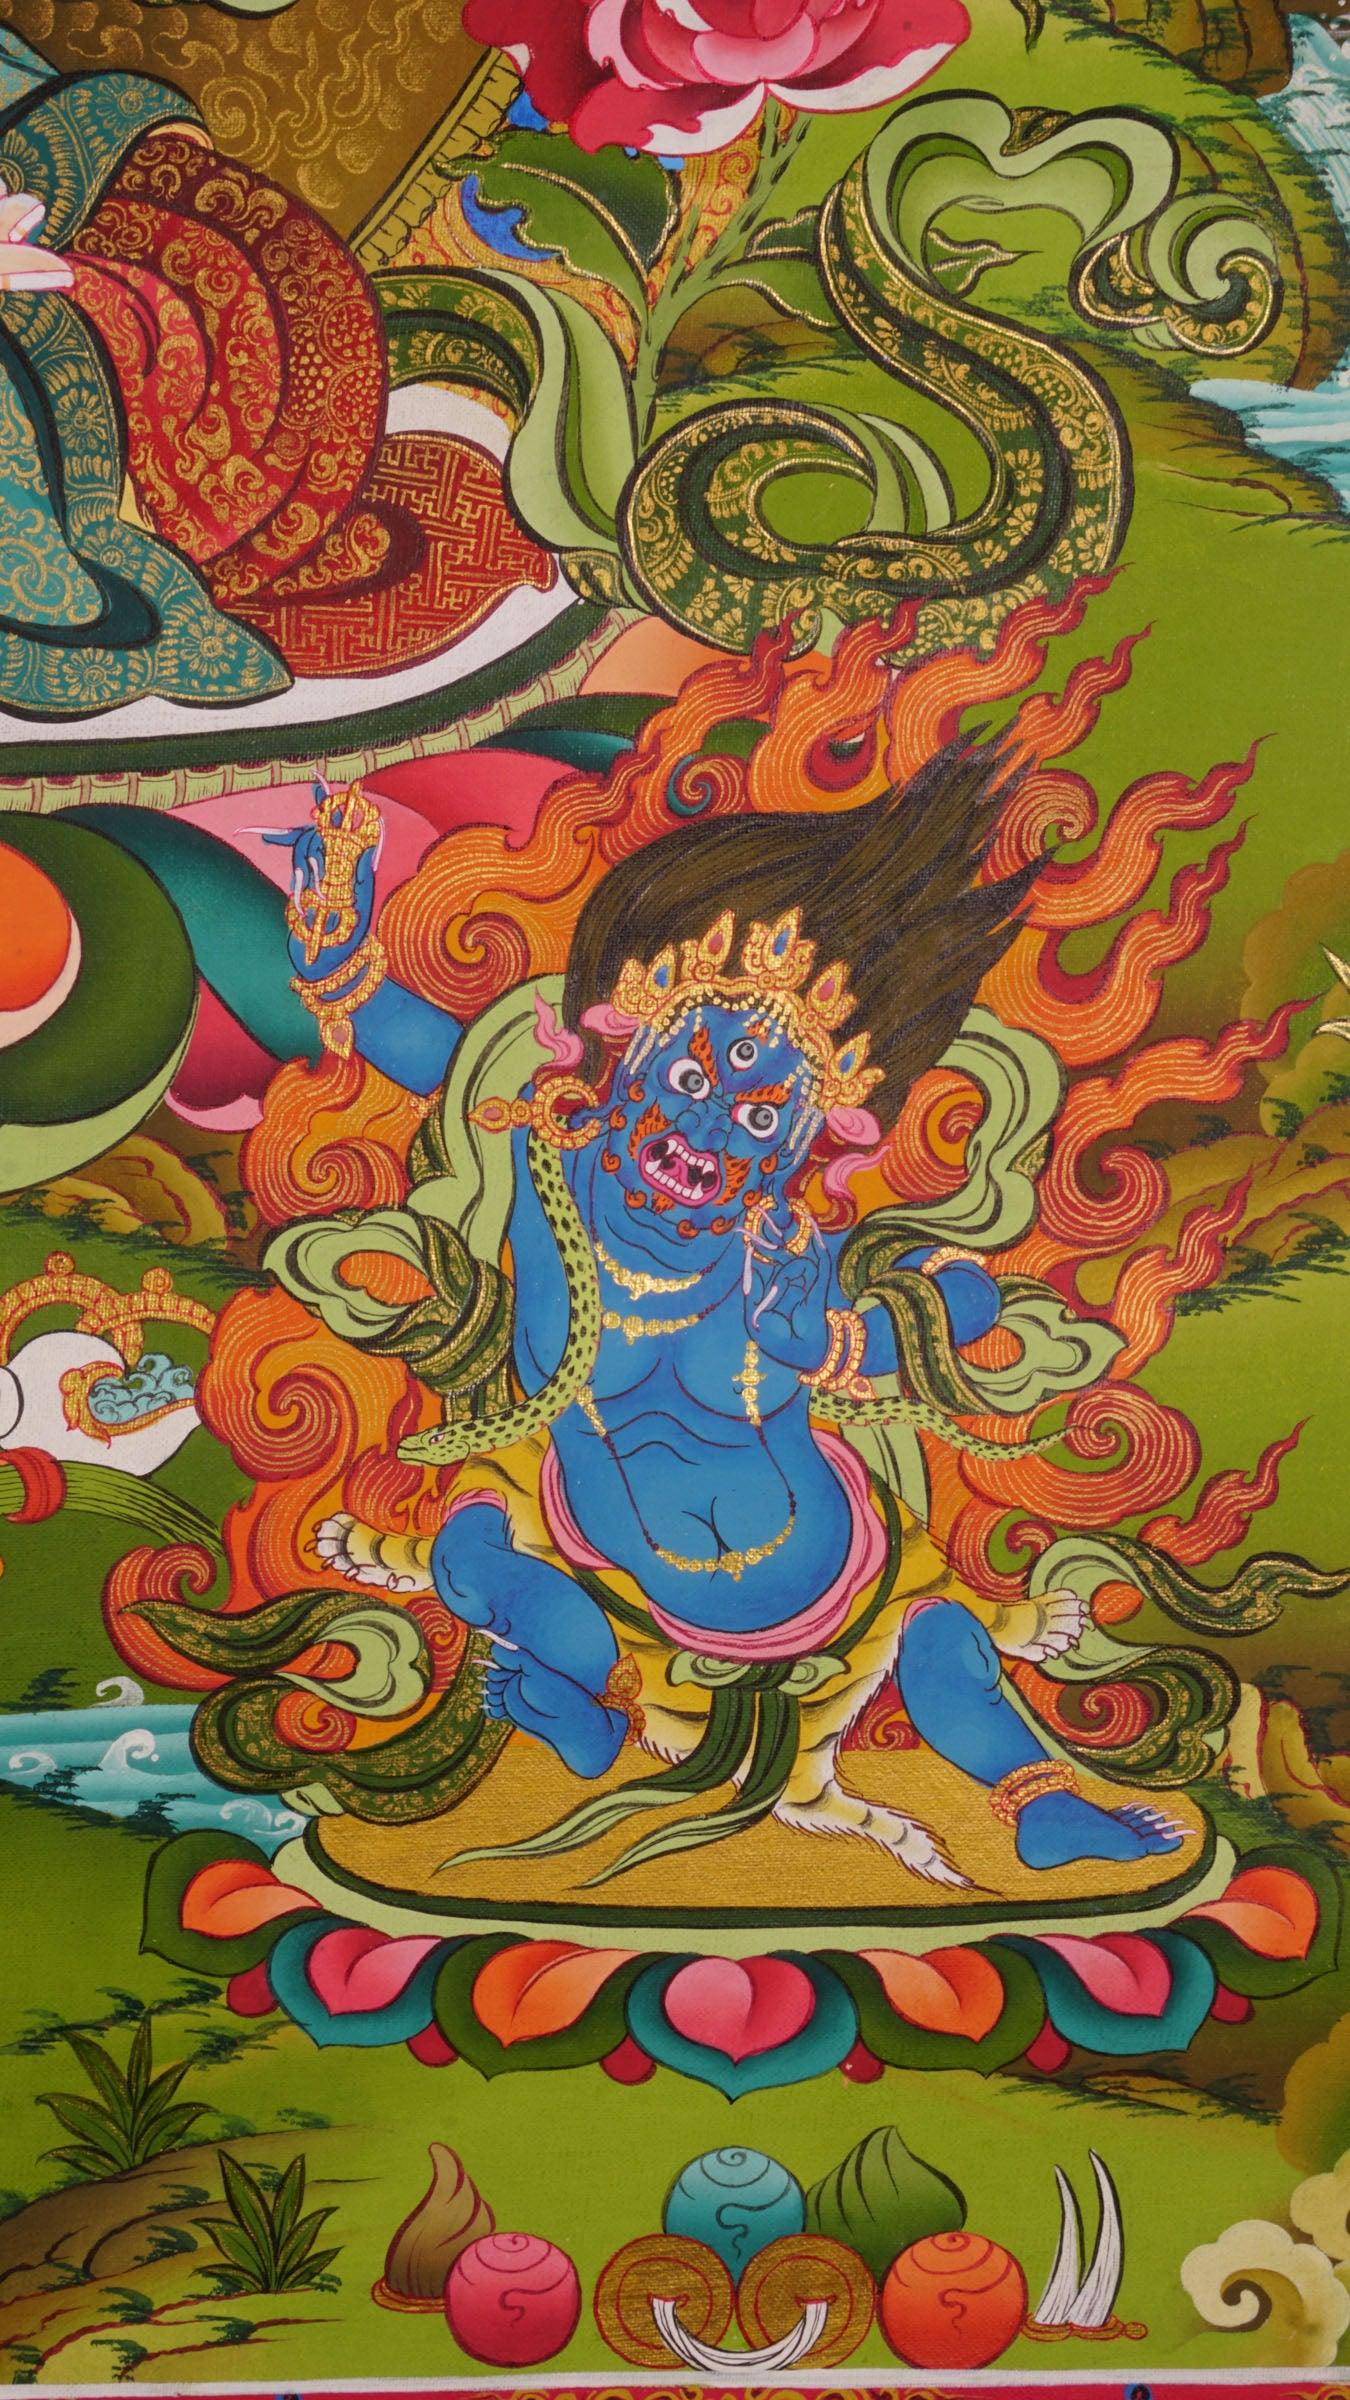 Chenrezig Thangka Painting with five deities